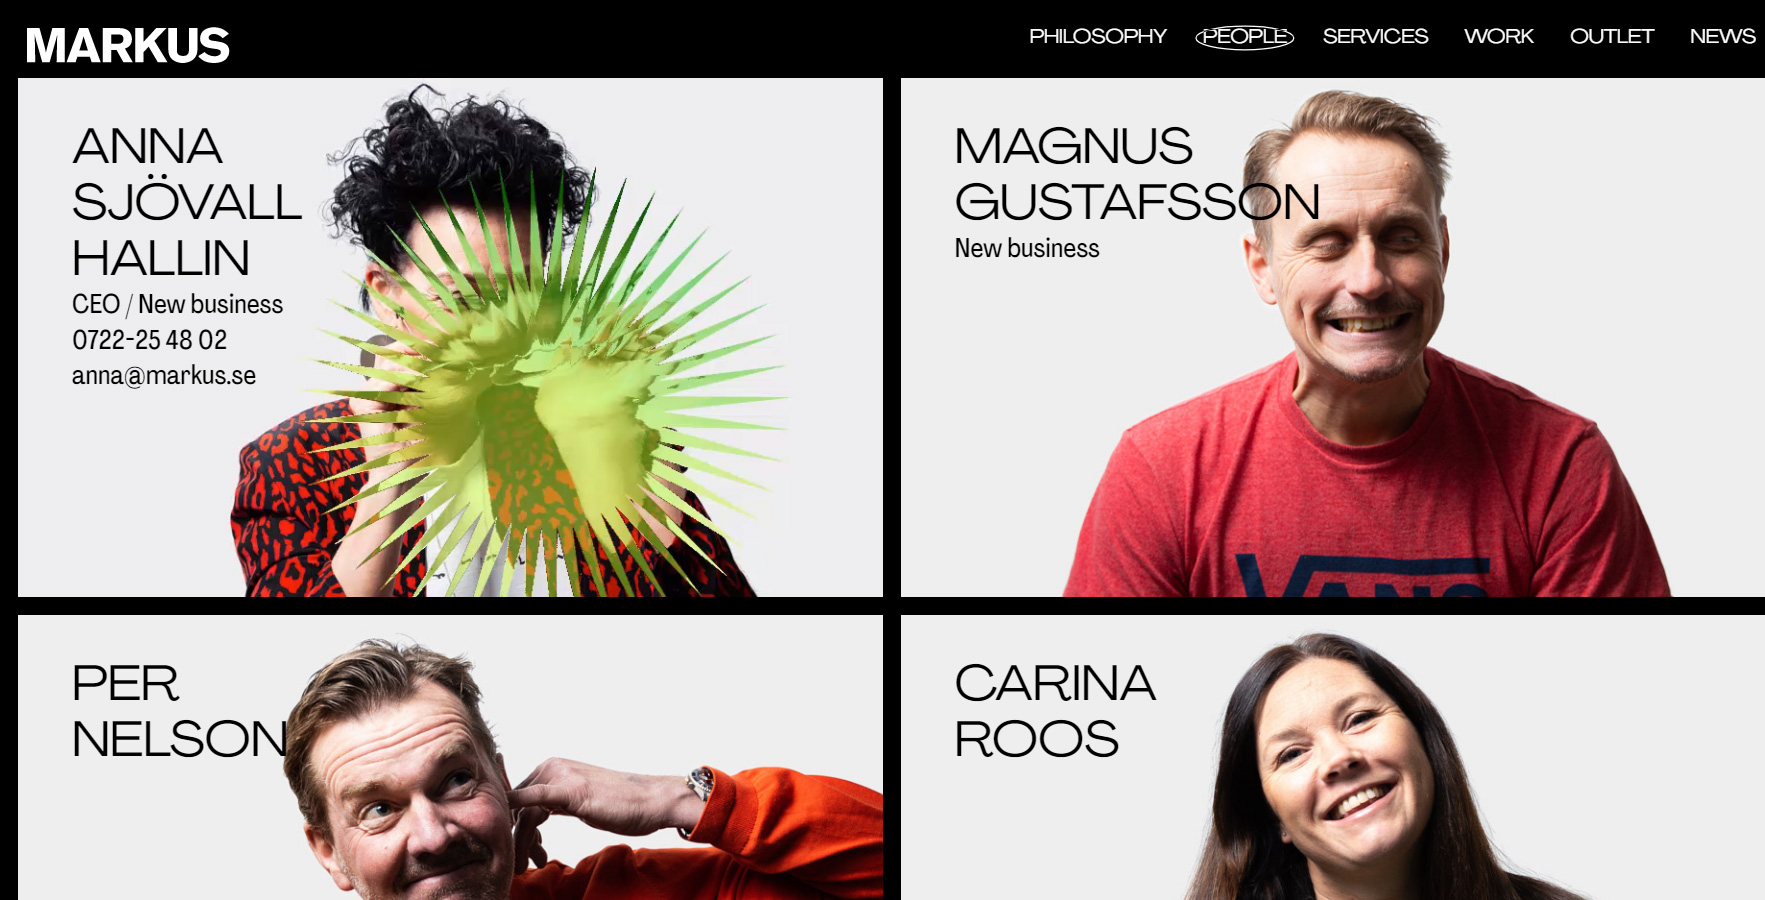 Markus Agency - Website of the Day